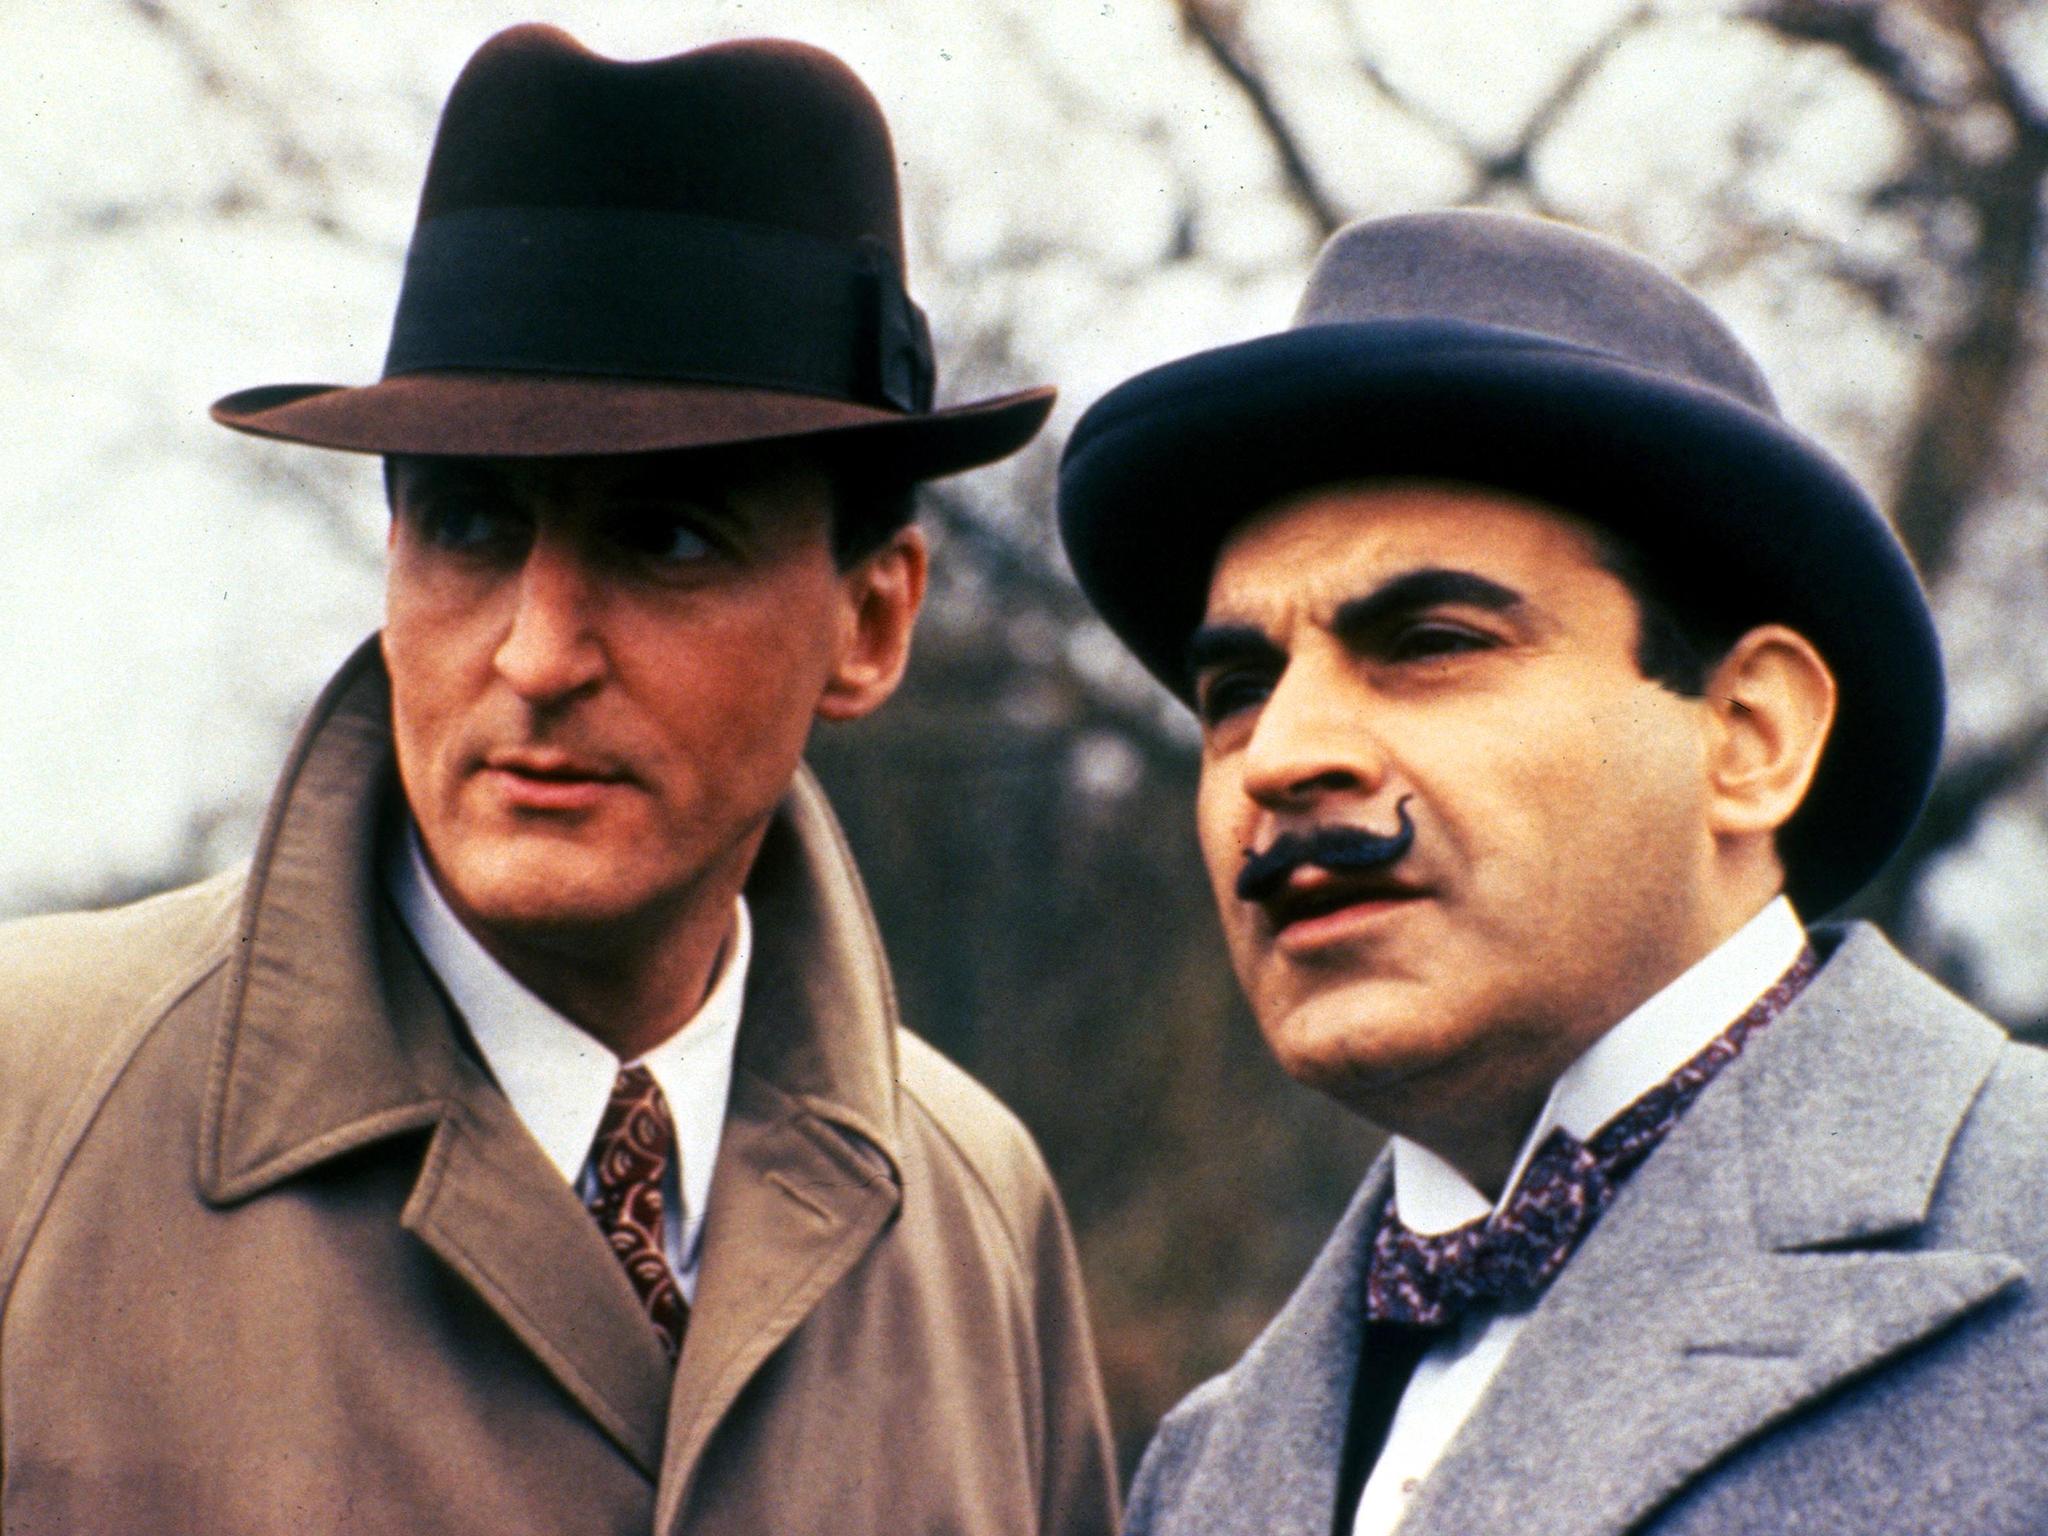 Classic whodunnits often tell the whole story in retrospect, for example with Arthur Hastings recounting the adventures of Hercules Poirot